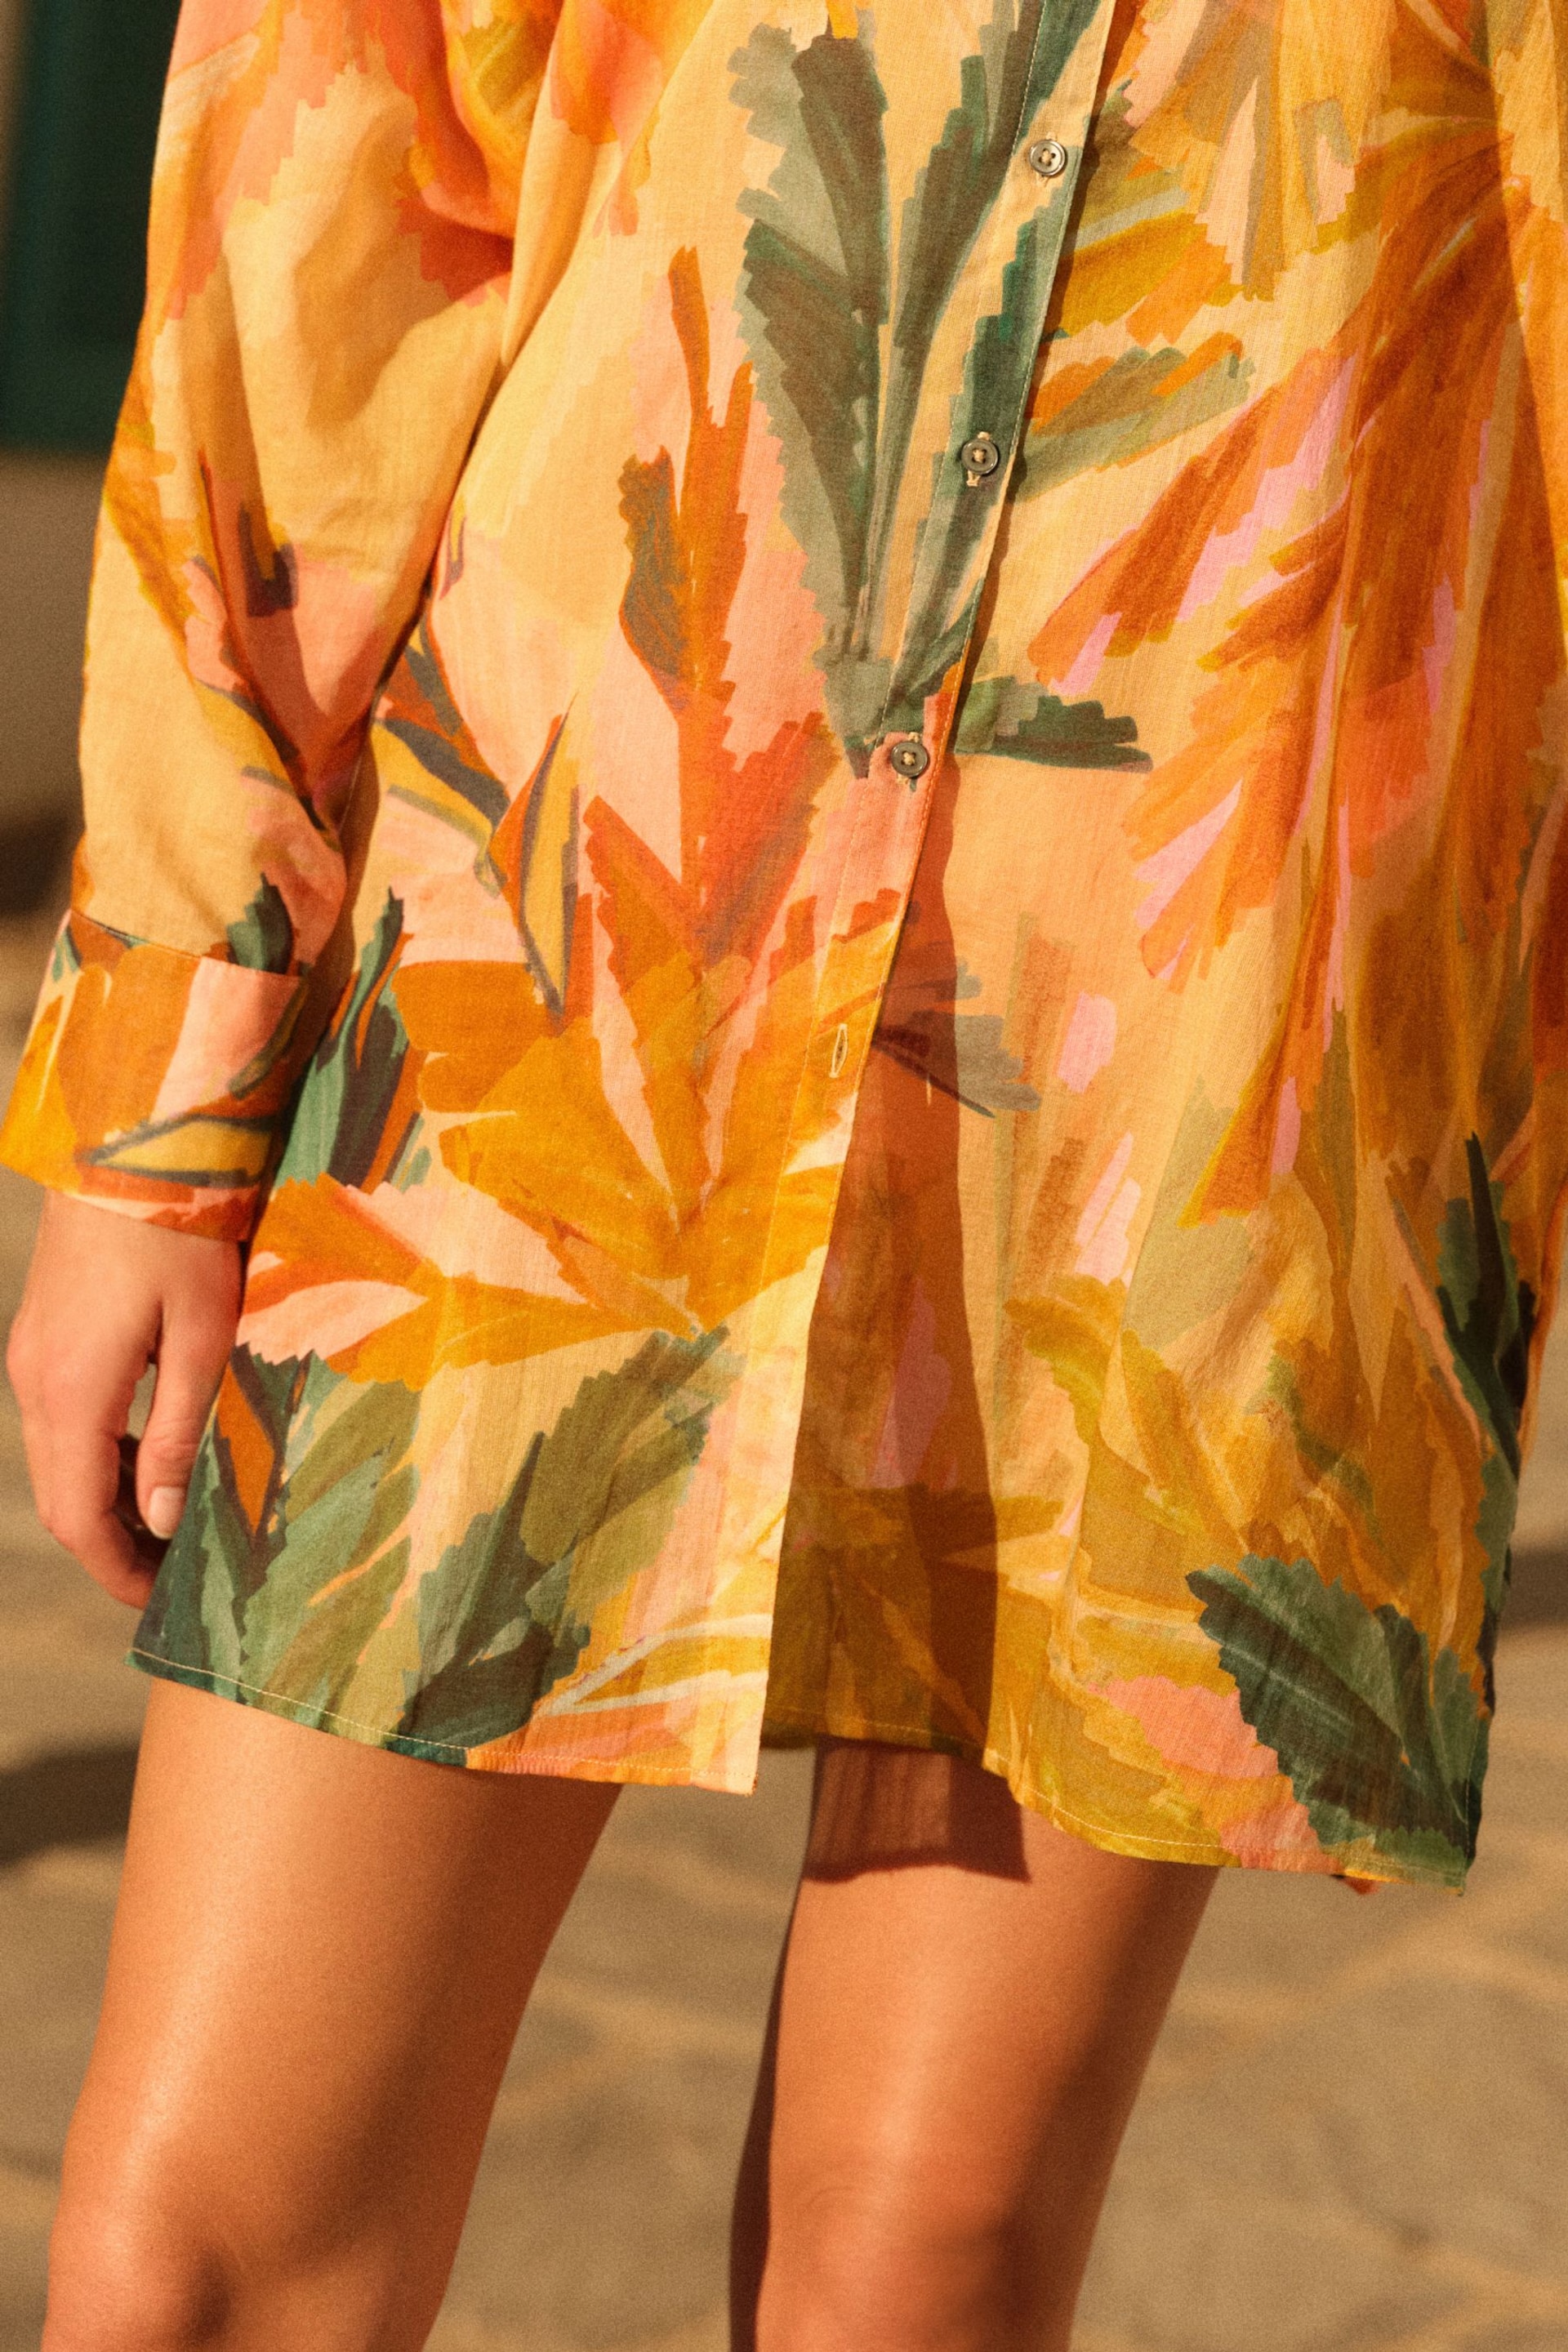 Coral/Pink Tropical Beach Shirt Cover-Up - Image 5 of 7